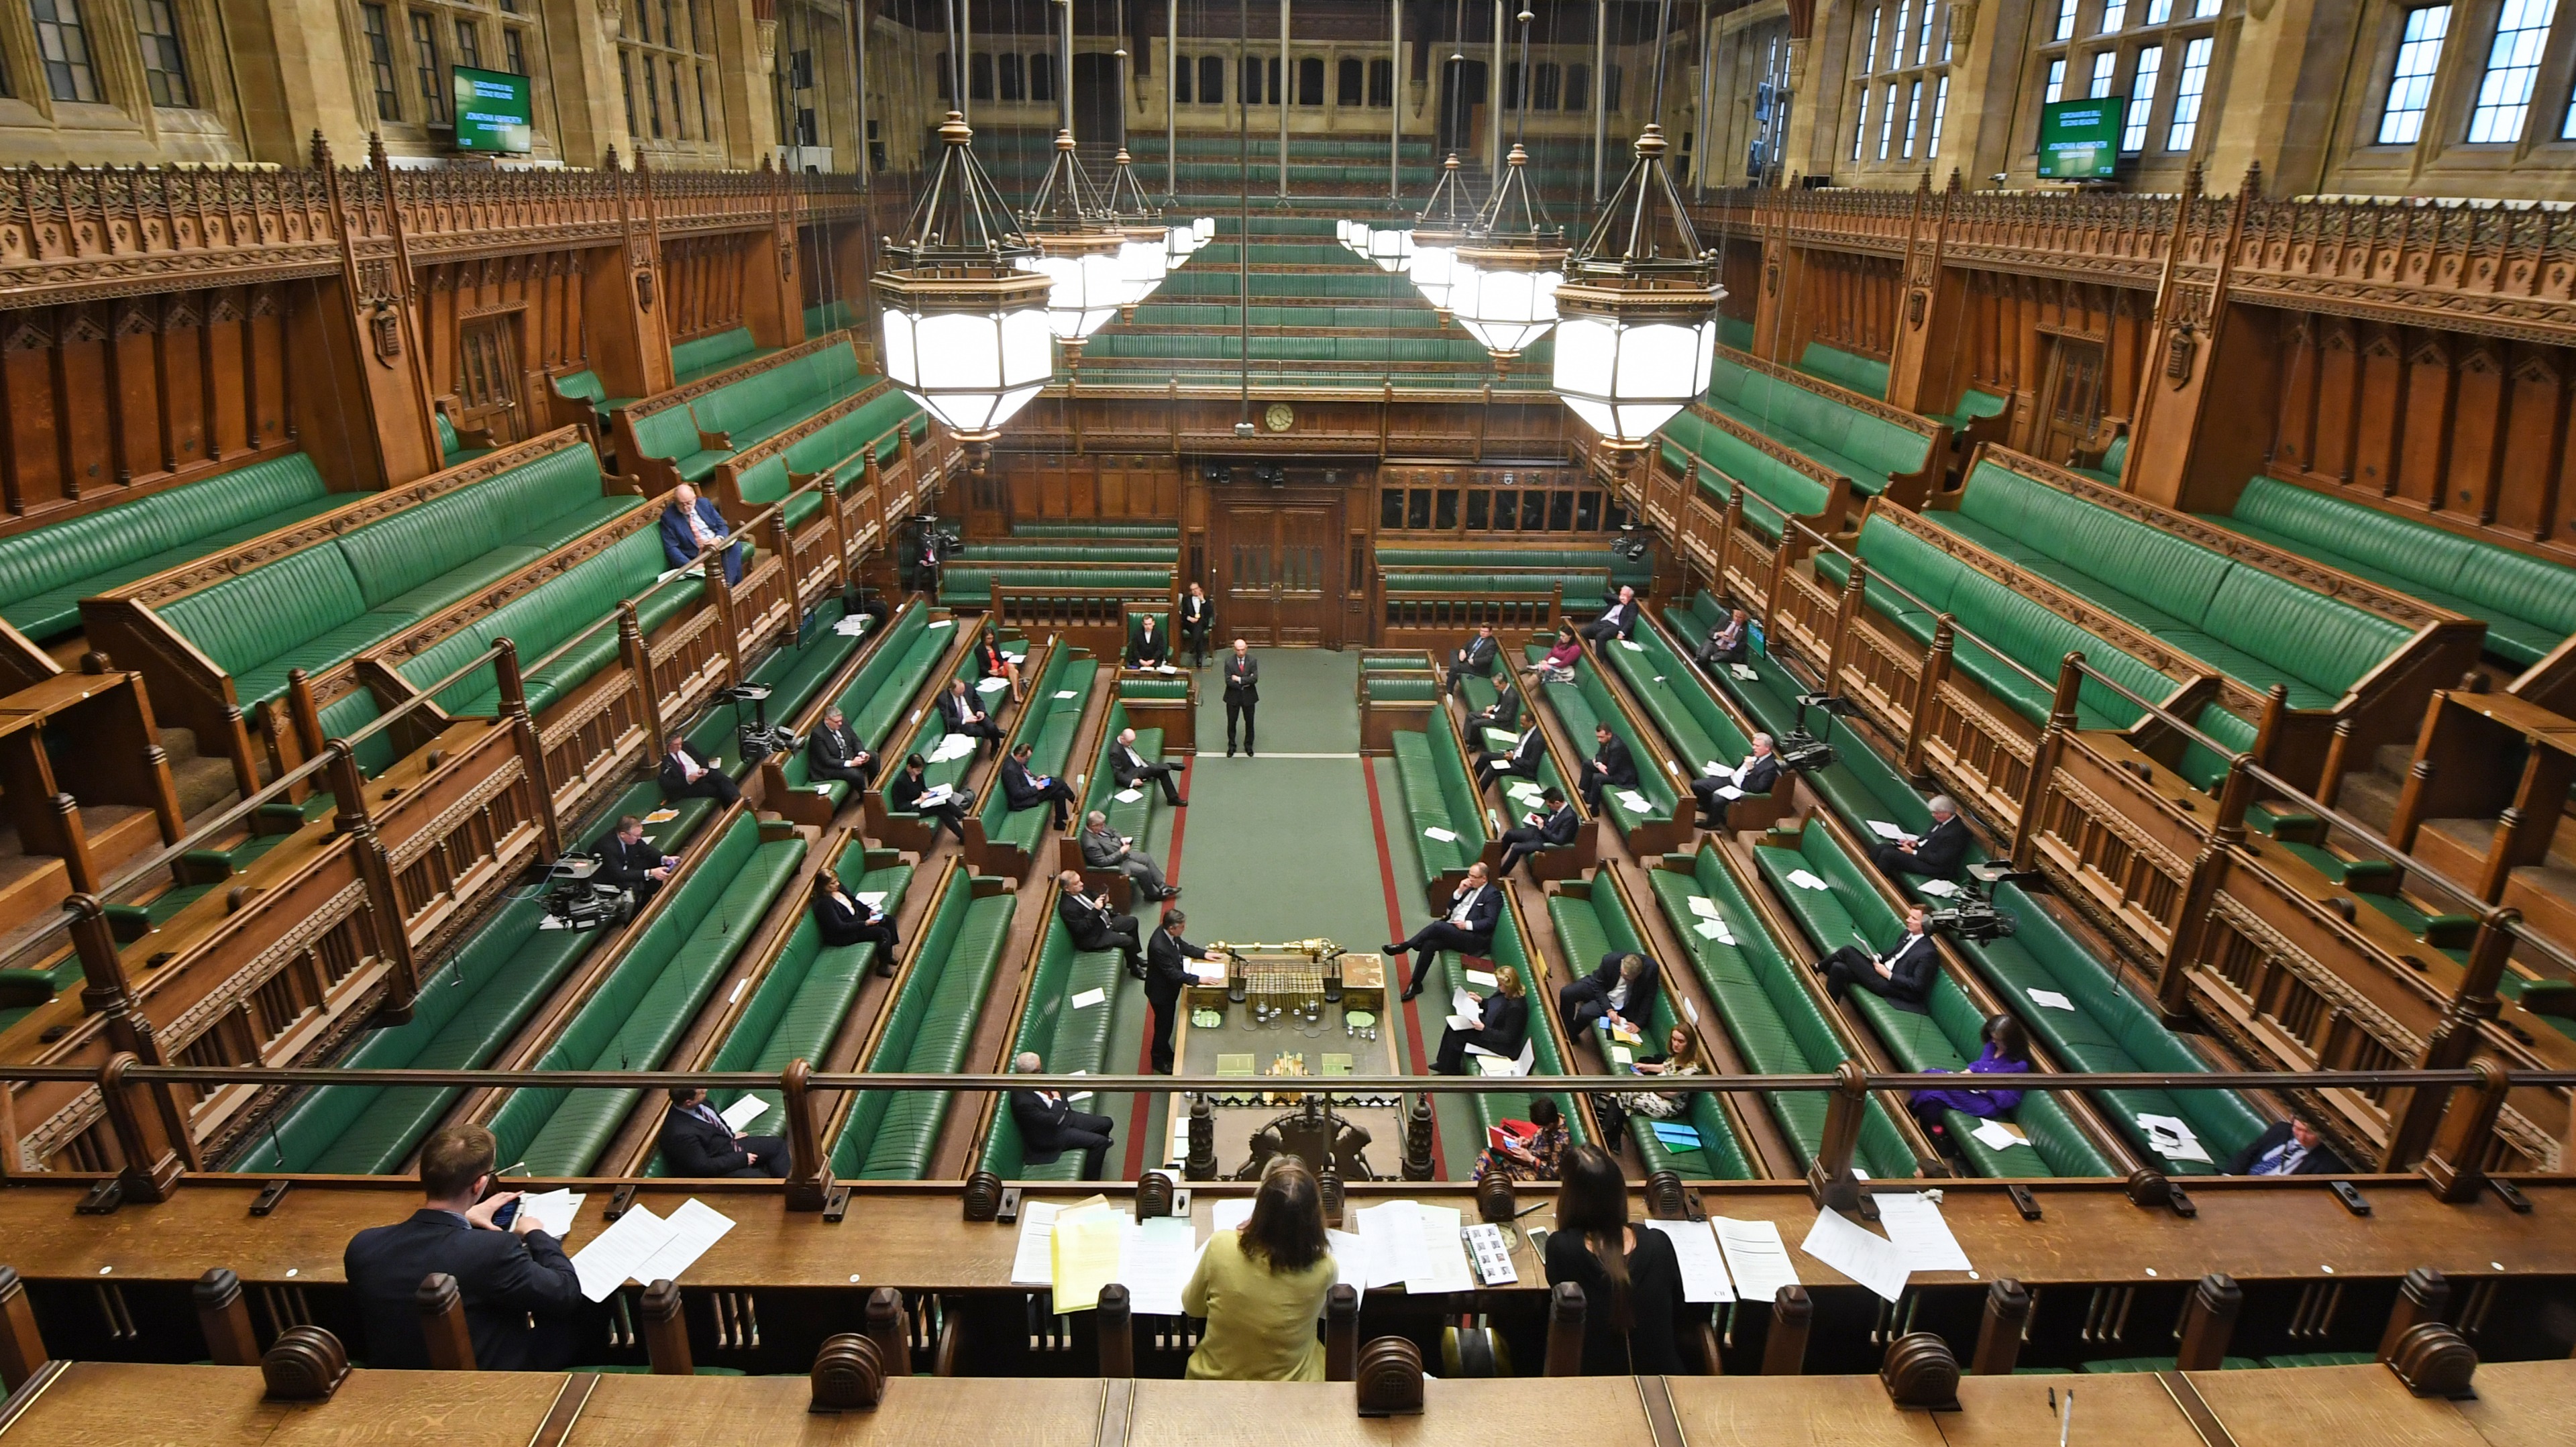 virtual tour of the house of commons